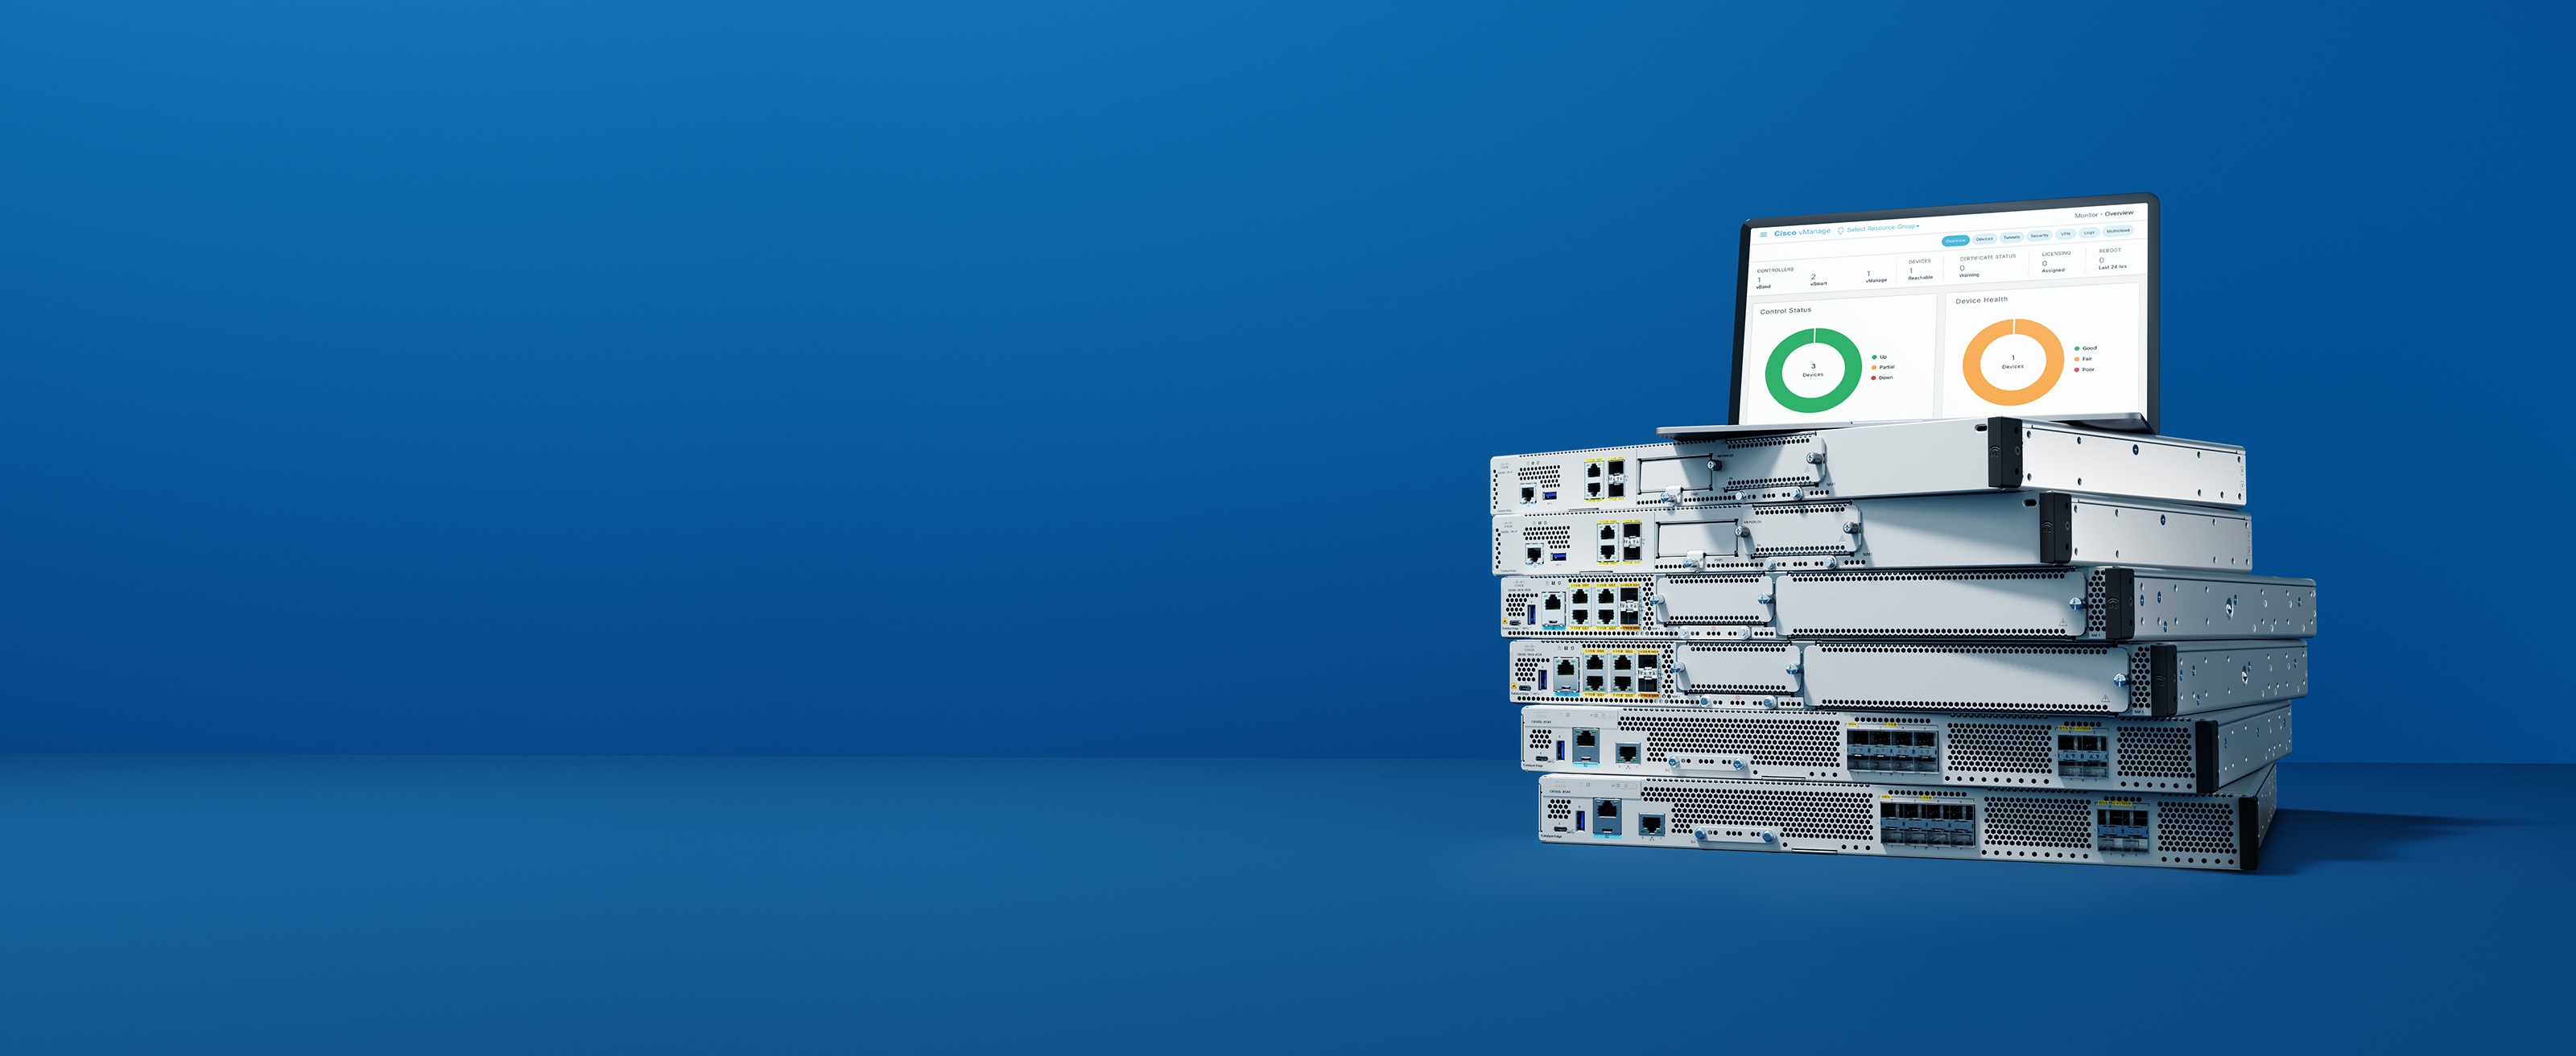 Cisco Catalyst 8000 Edge Platforms with Cisco Catalyst SD-WAN Manager interface